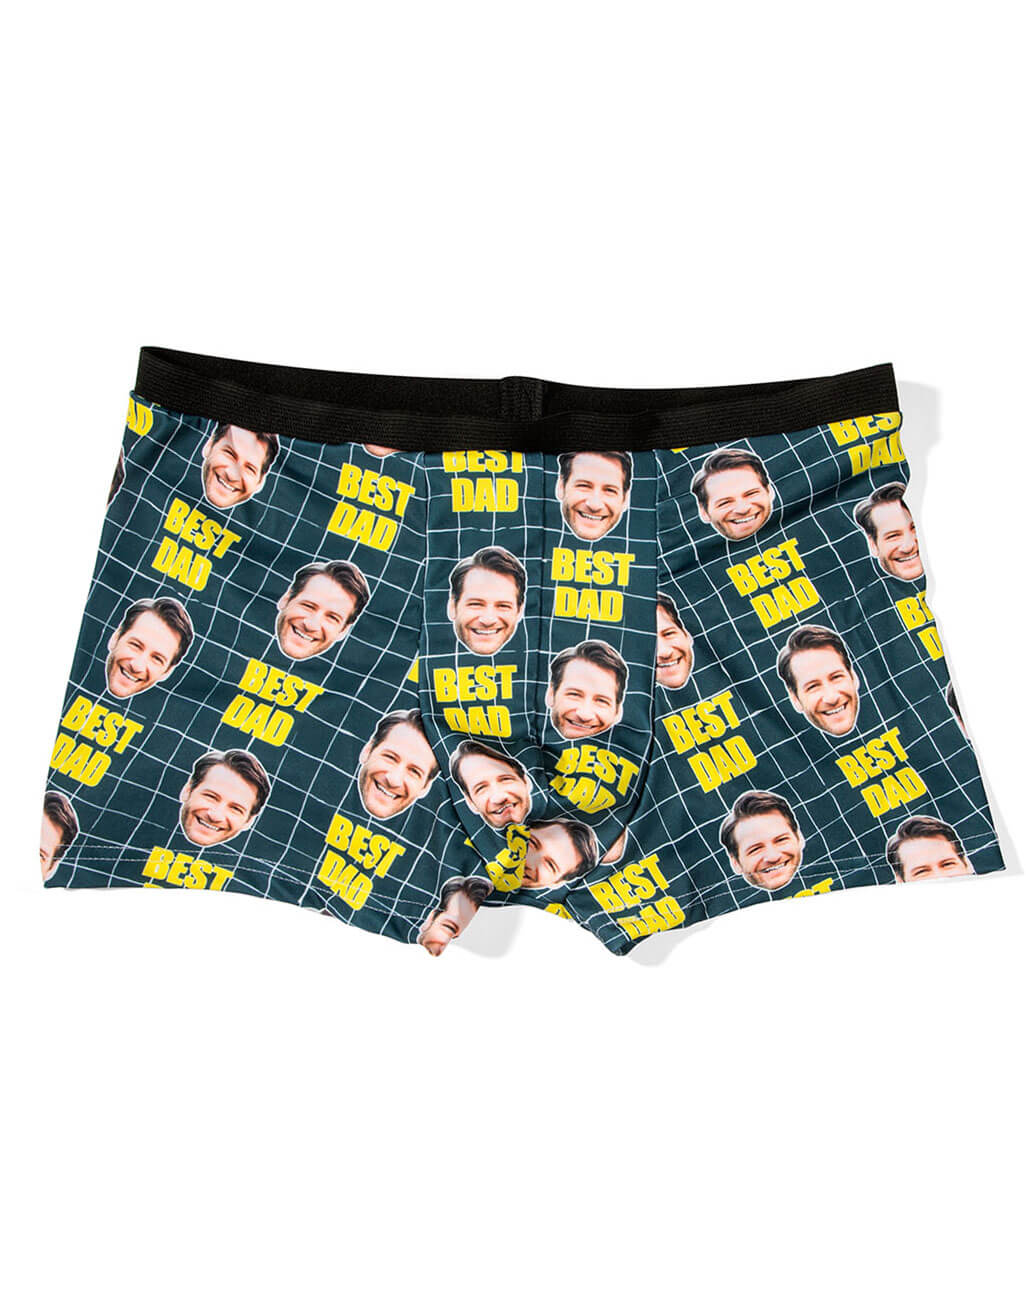 Your Best Dad Boxers